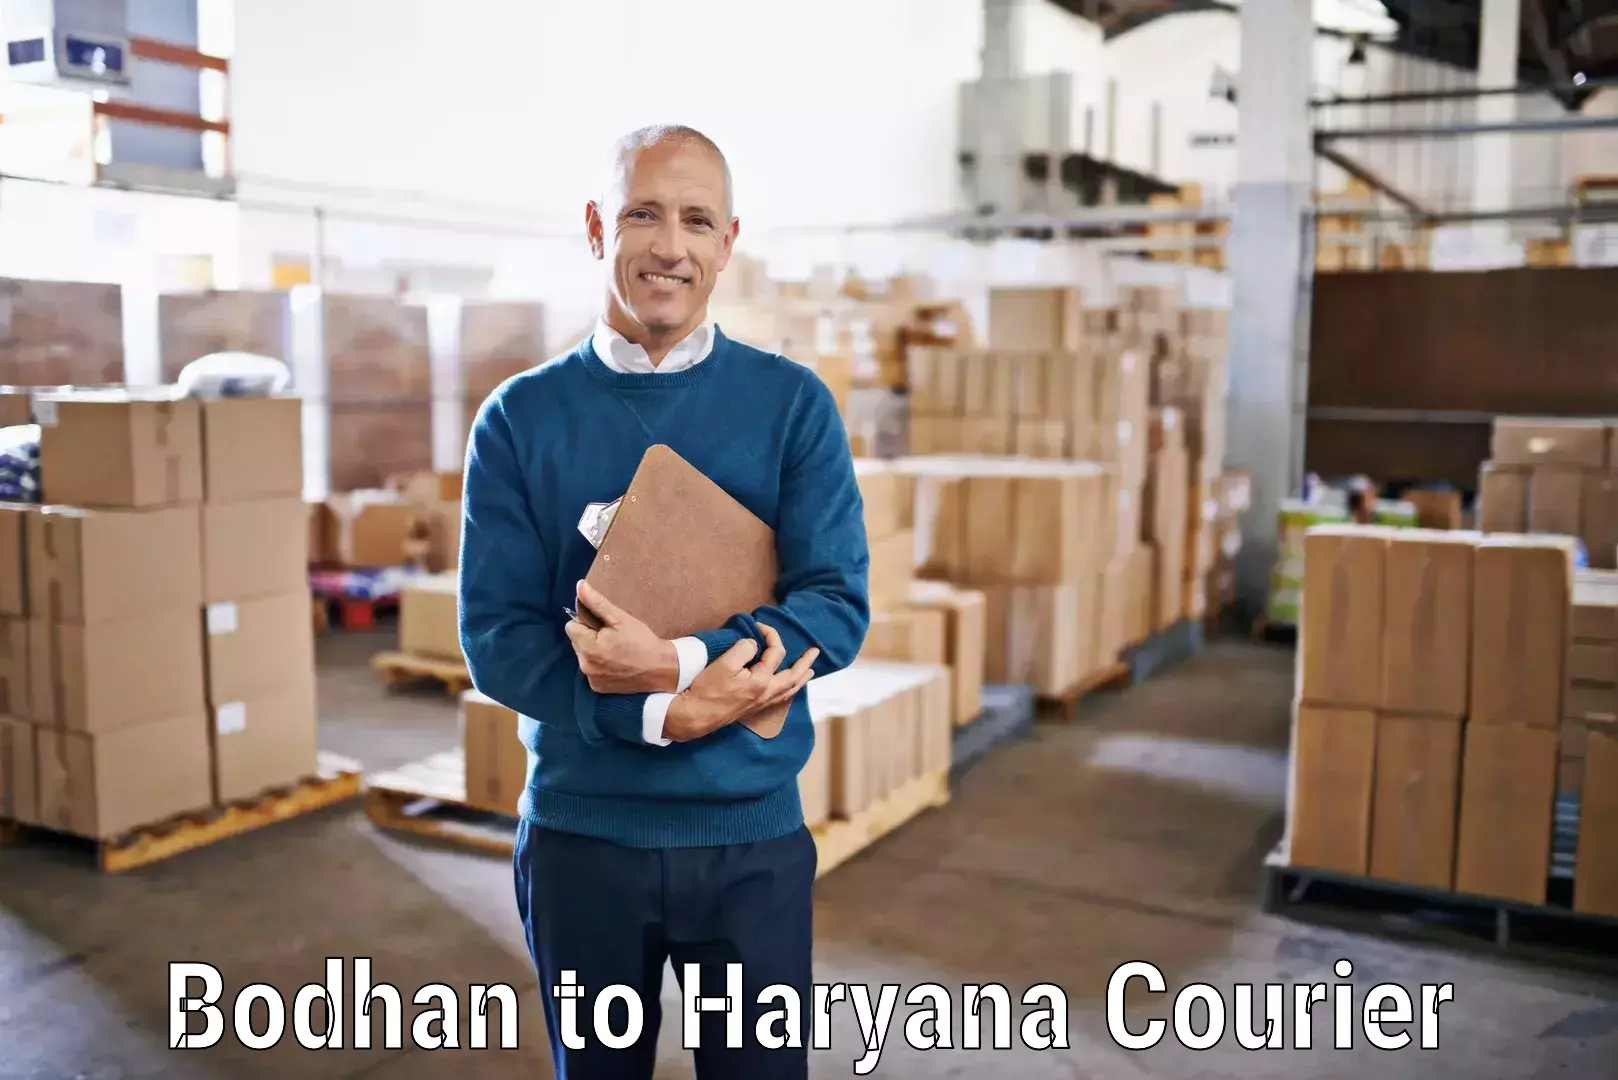 Air courier services Bodhan to Gurugram